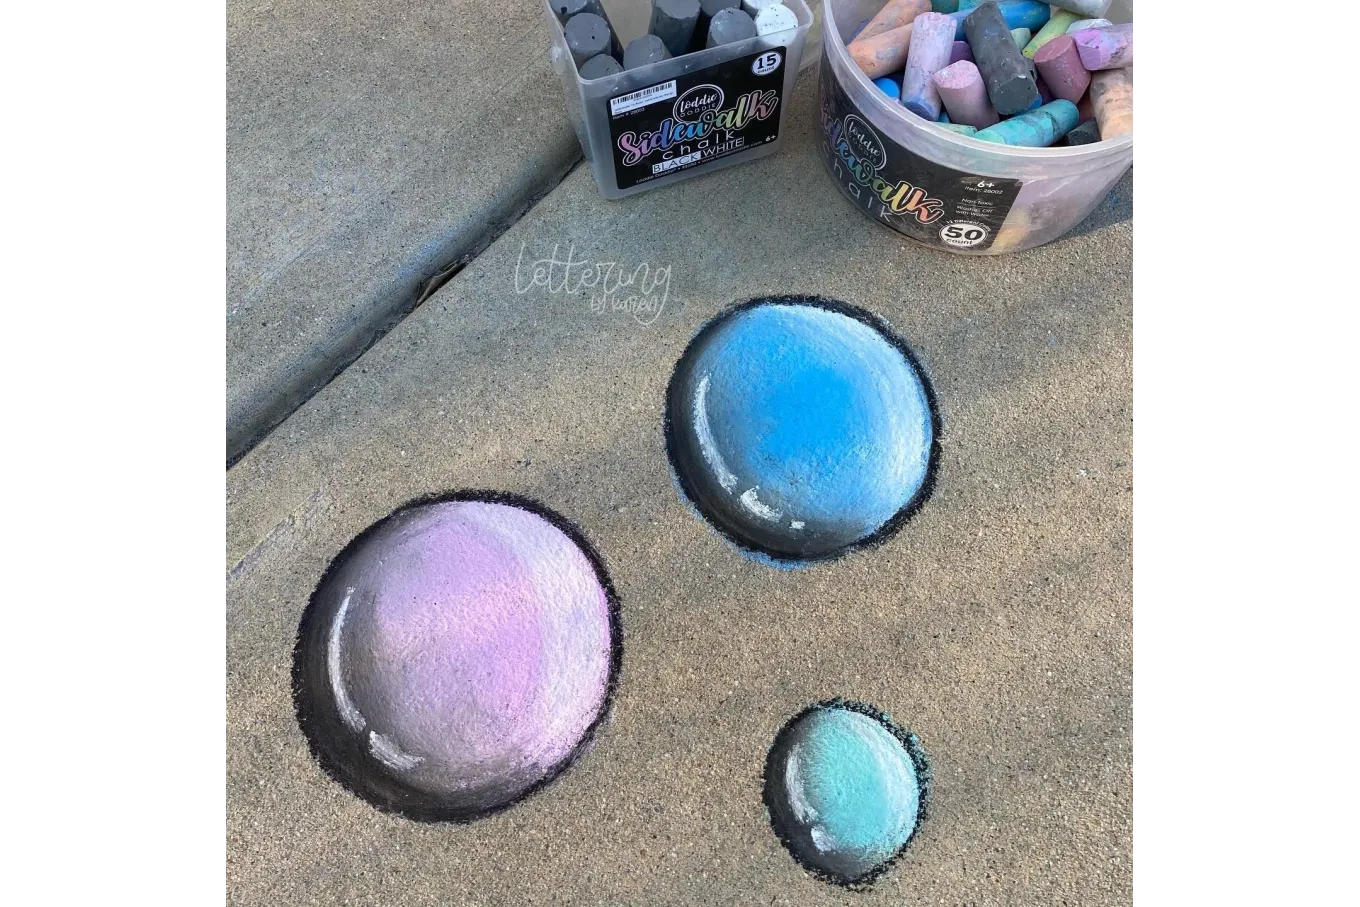 Chalk art of purple, blue, and green bubbles with black outlines